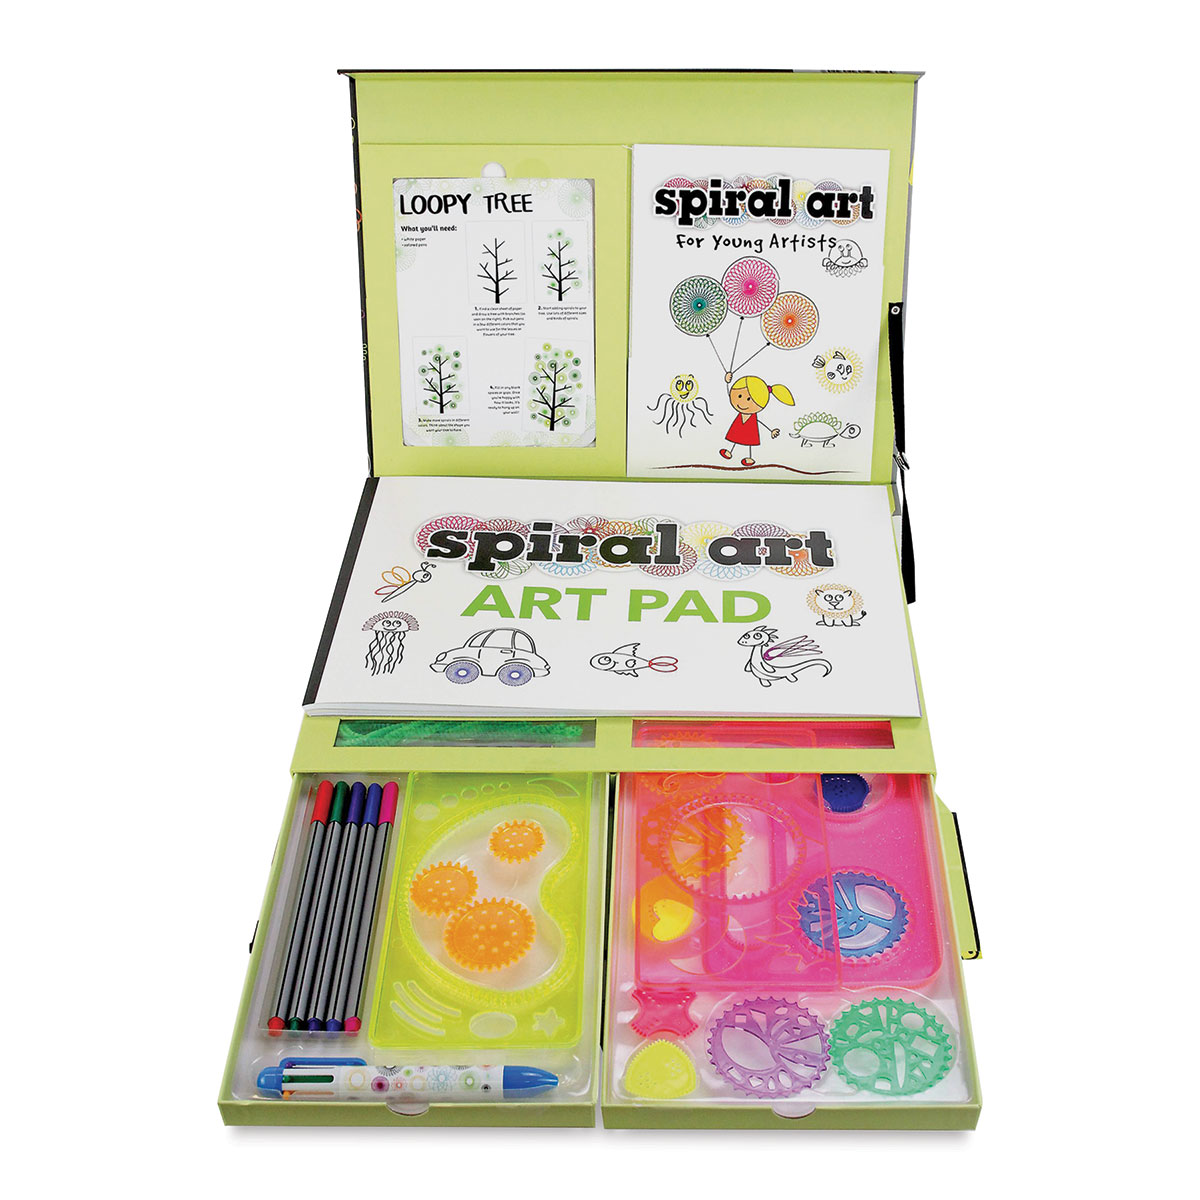 SpiceBox Spiral Art for Young Artists Kit